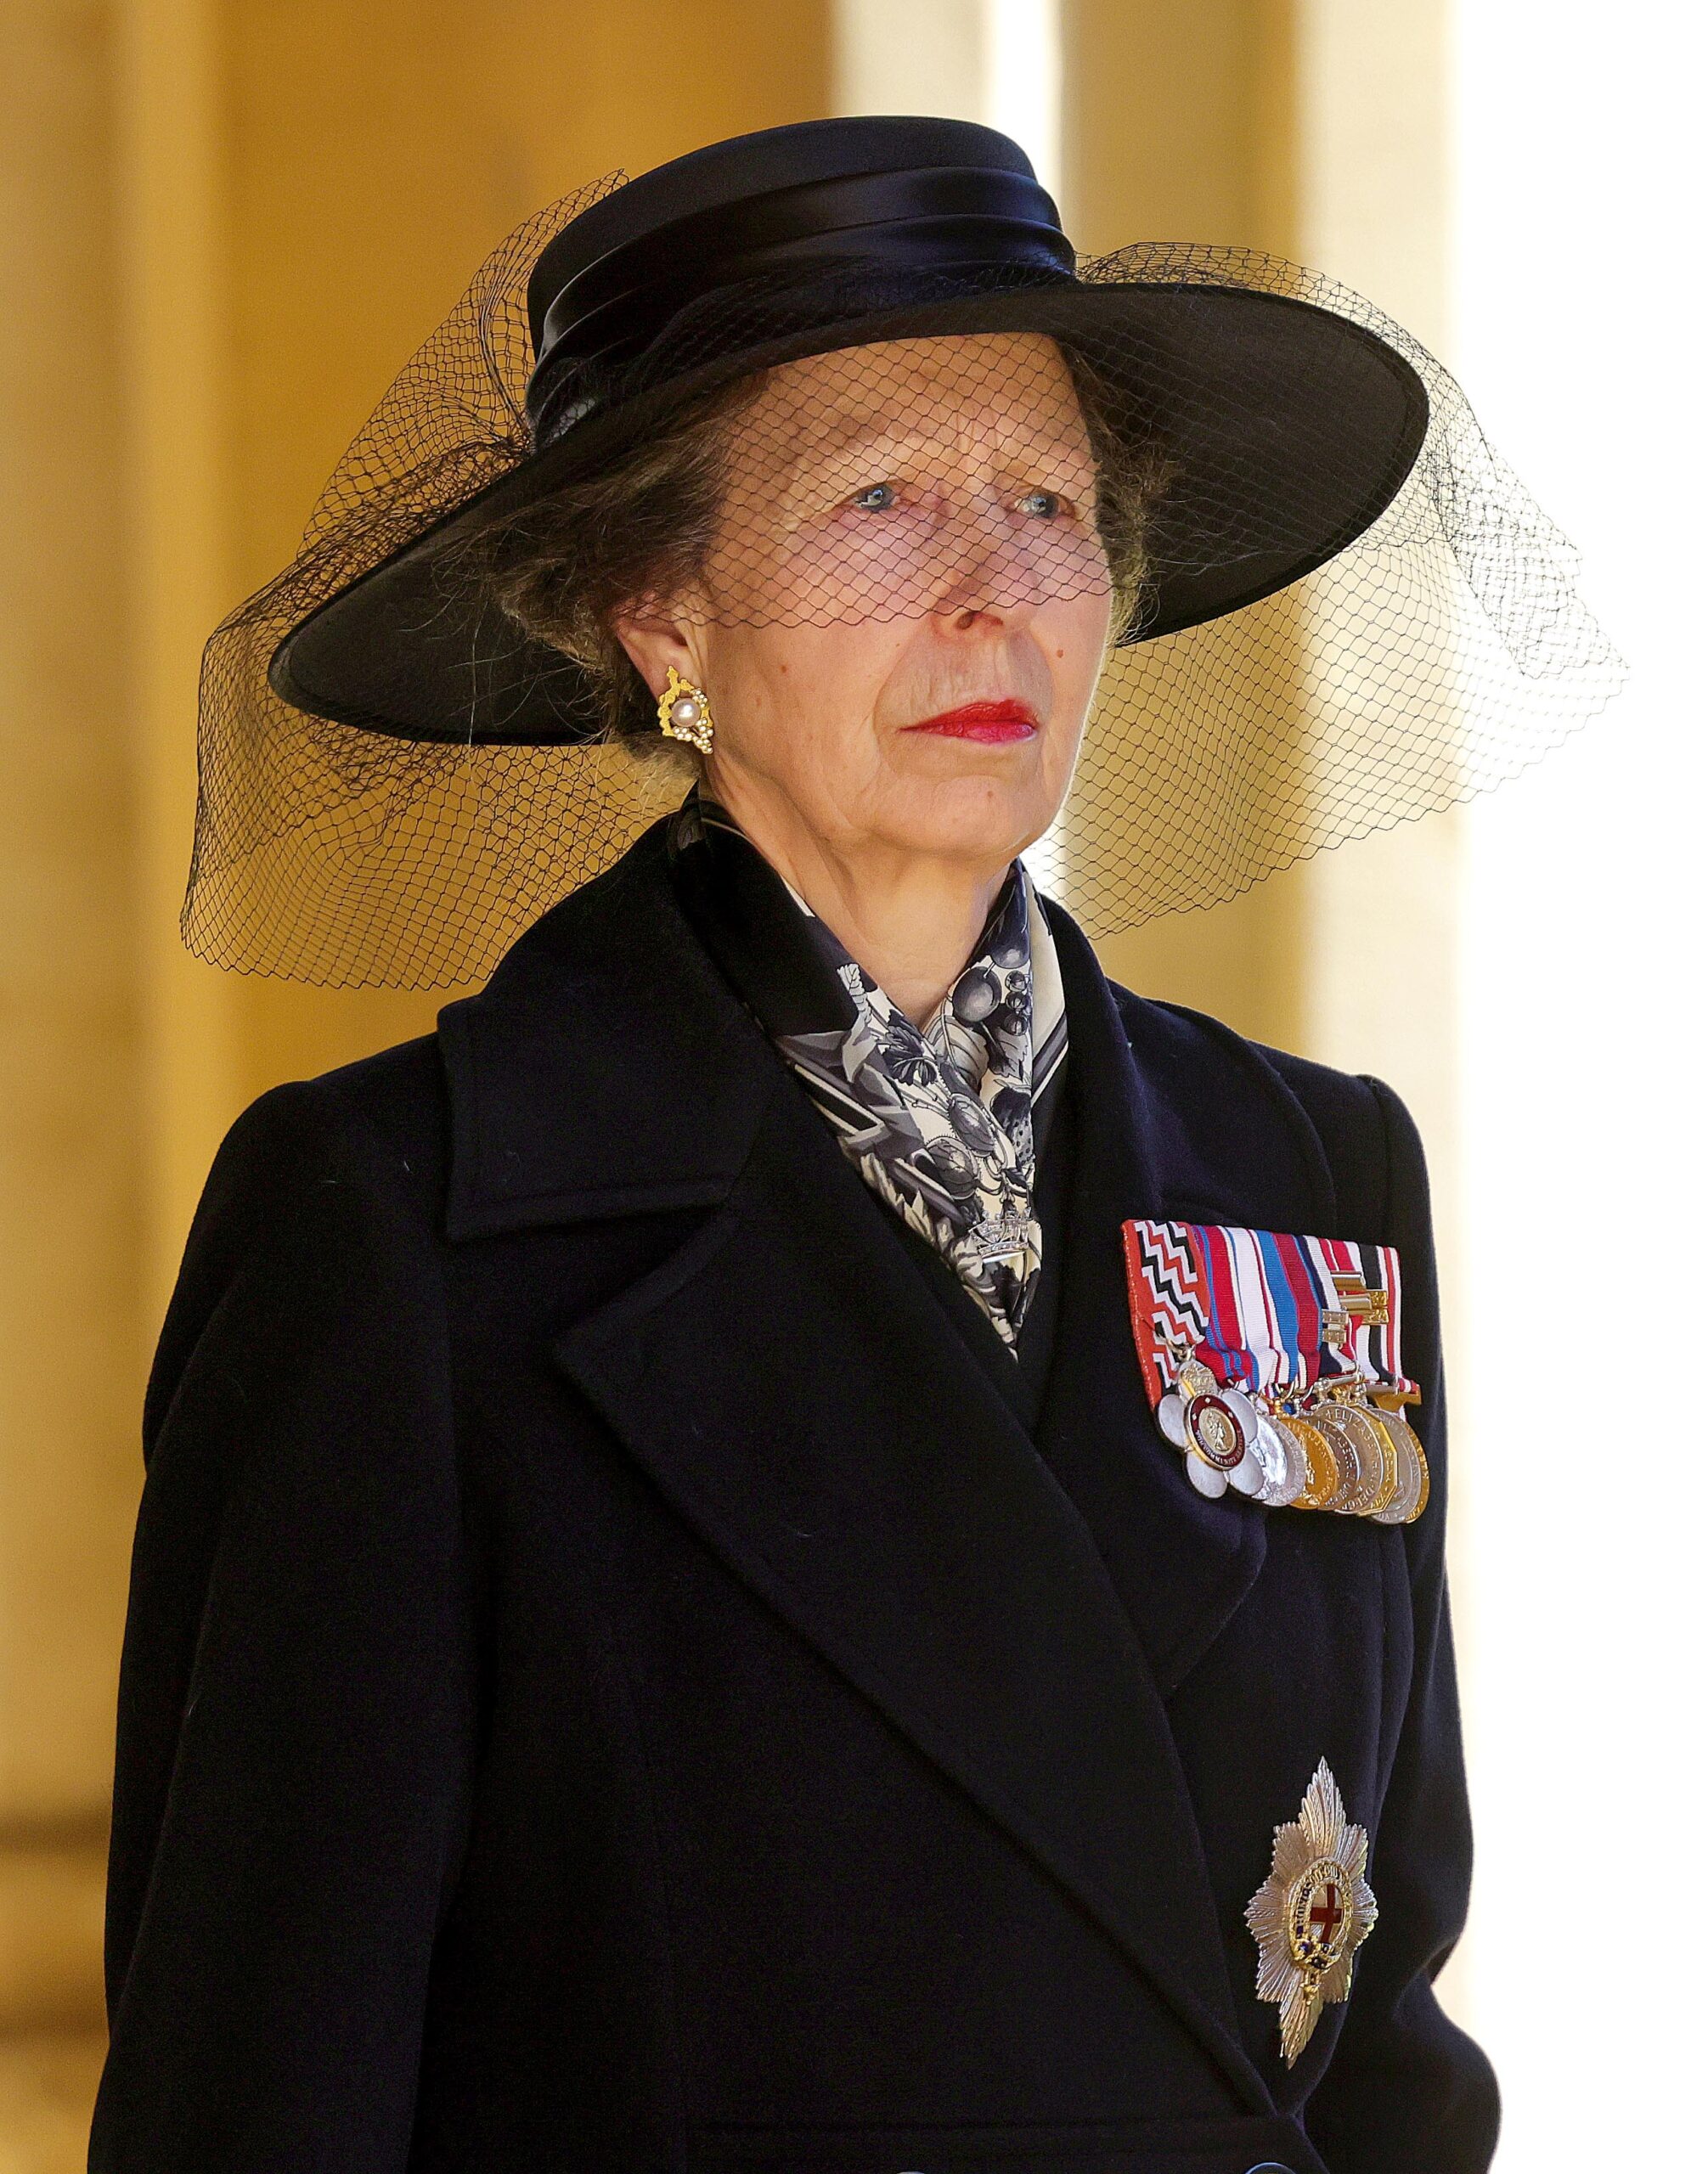 Princess Anne at Prince Philip's funeral. She's wearing a black coat and hat with military medals pinned to chest